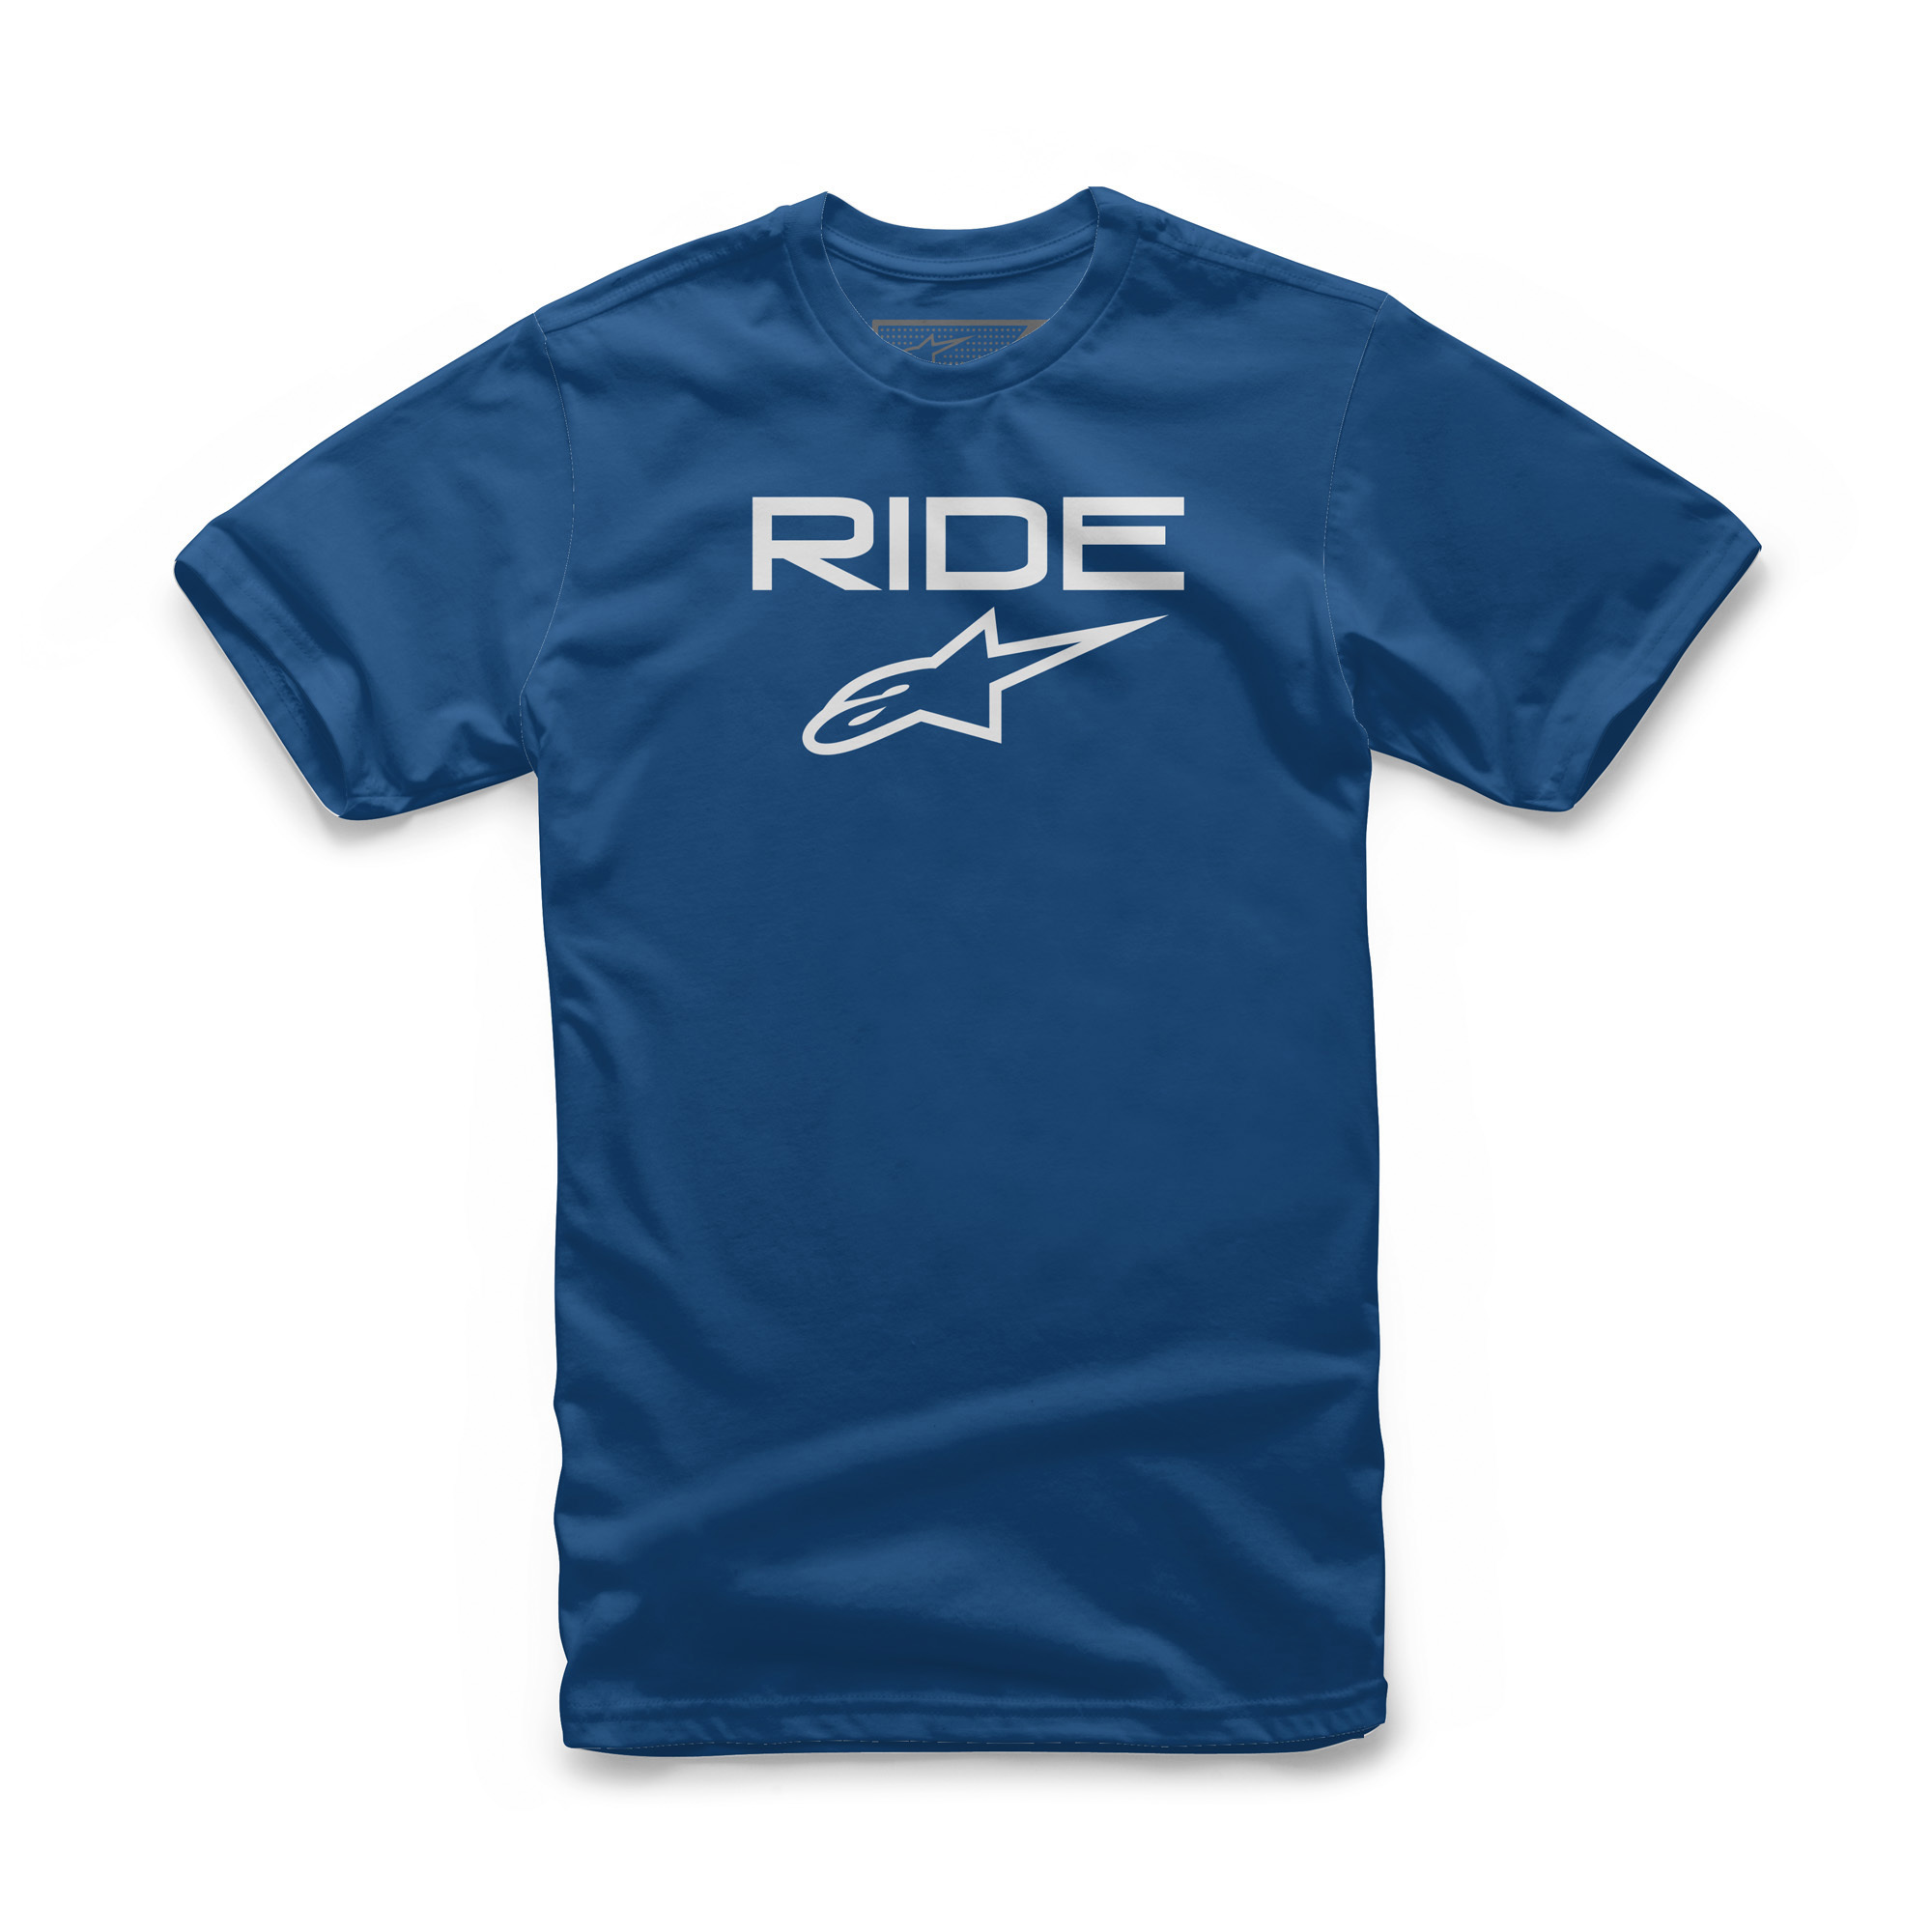 Ride 2.0 Tee Royal Blue/White 2X-Large - Click Image to Close